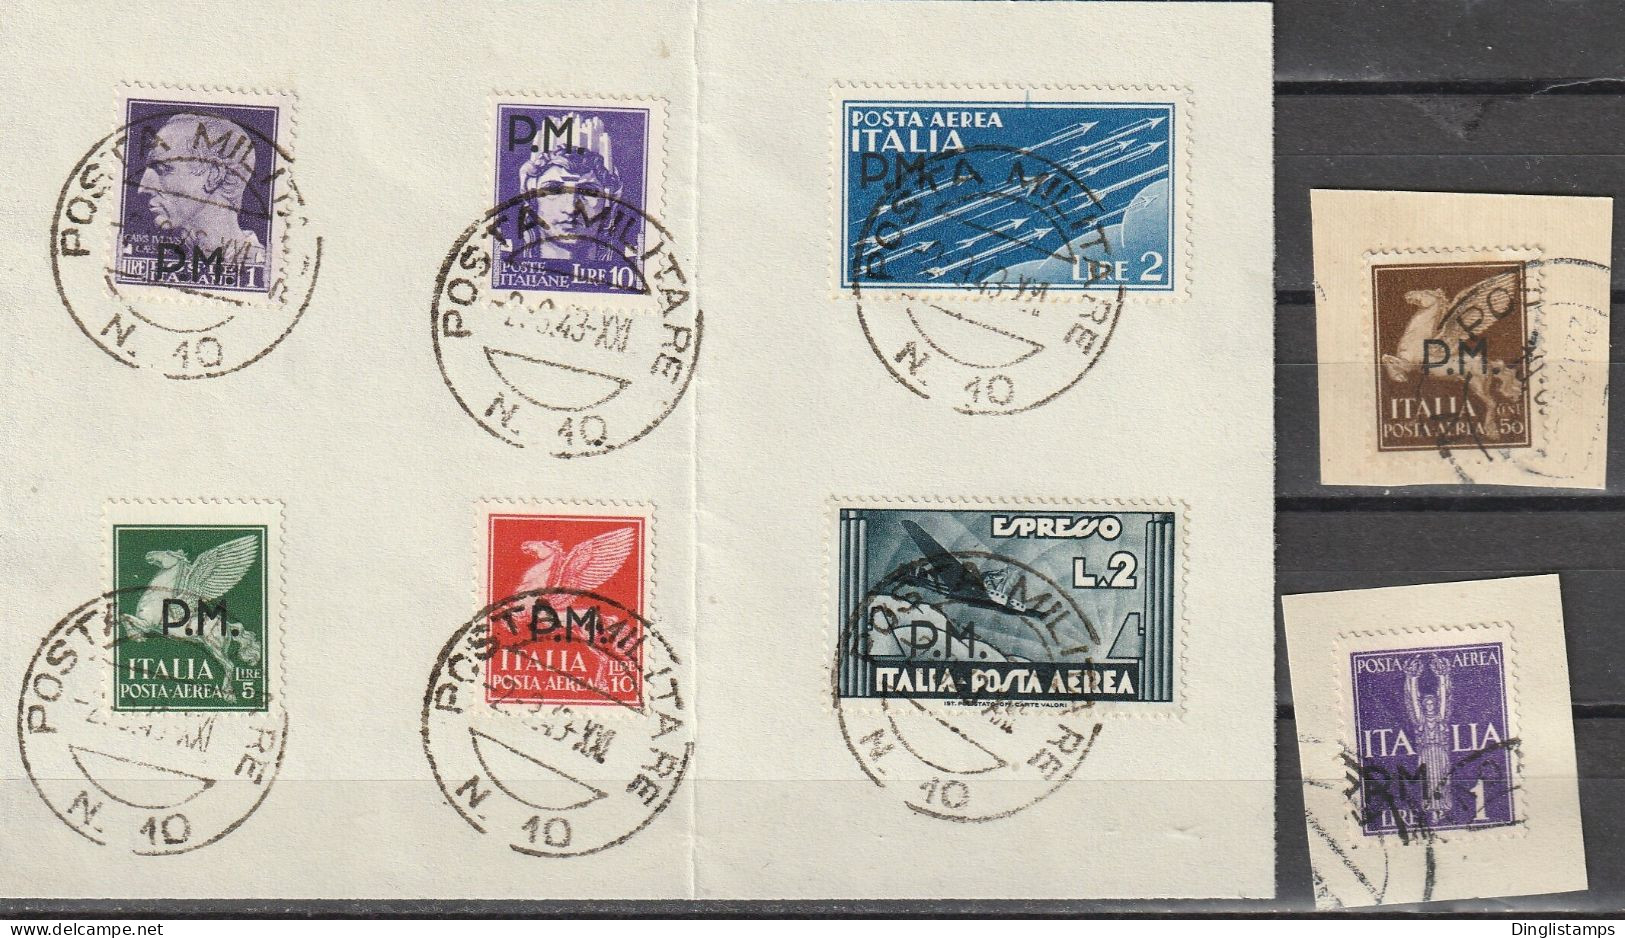 ITALY - 1942 Military Post With Overprint "PM" - Used